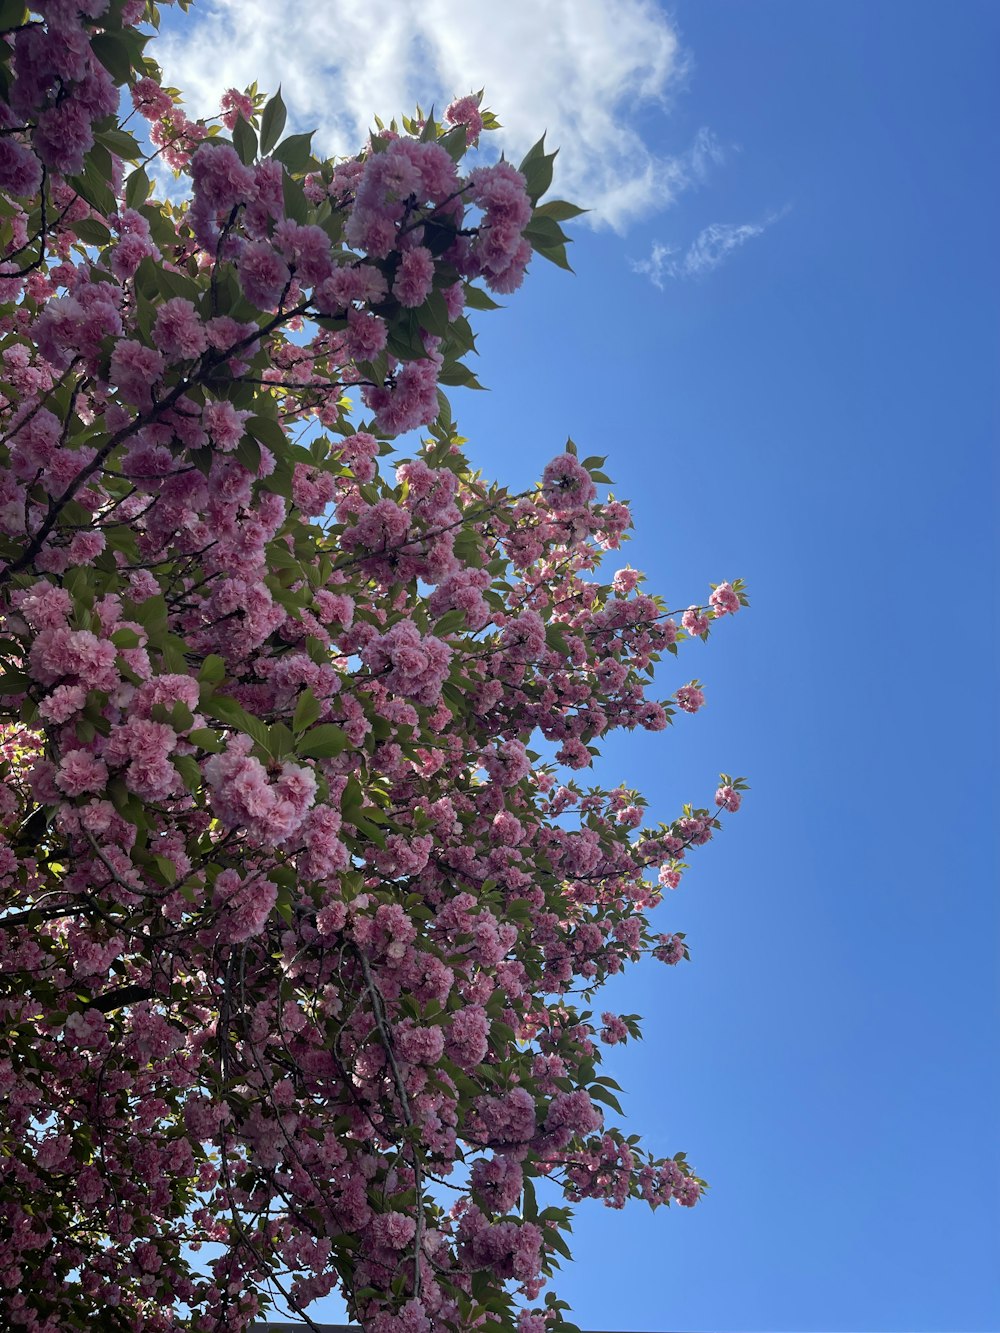 a tree with pink flowers in the foreground and a blue sky in the background